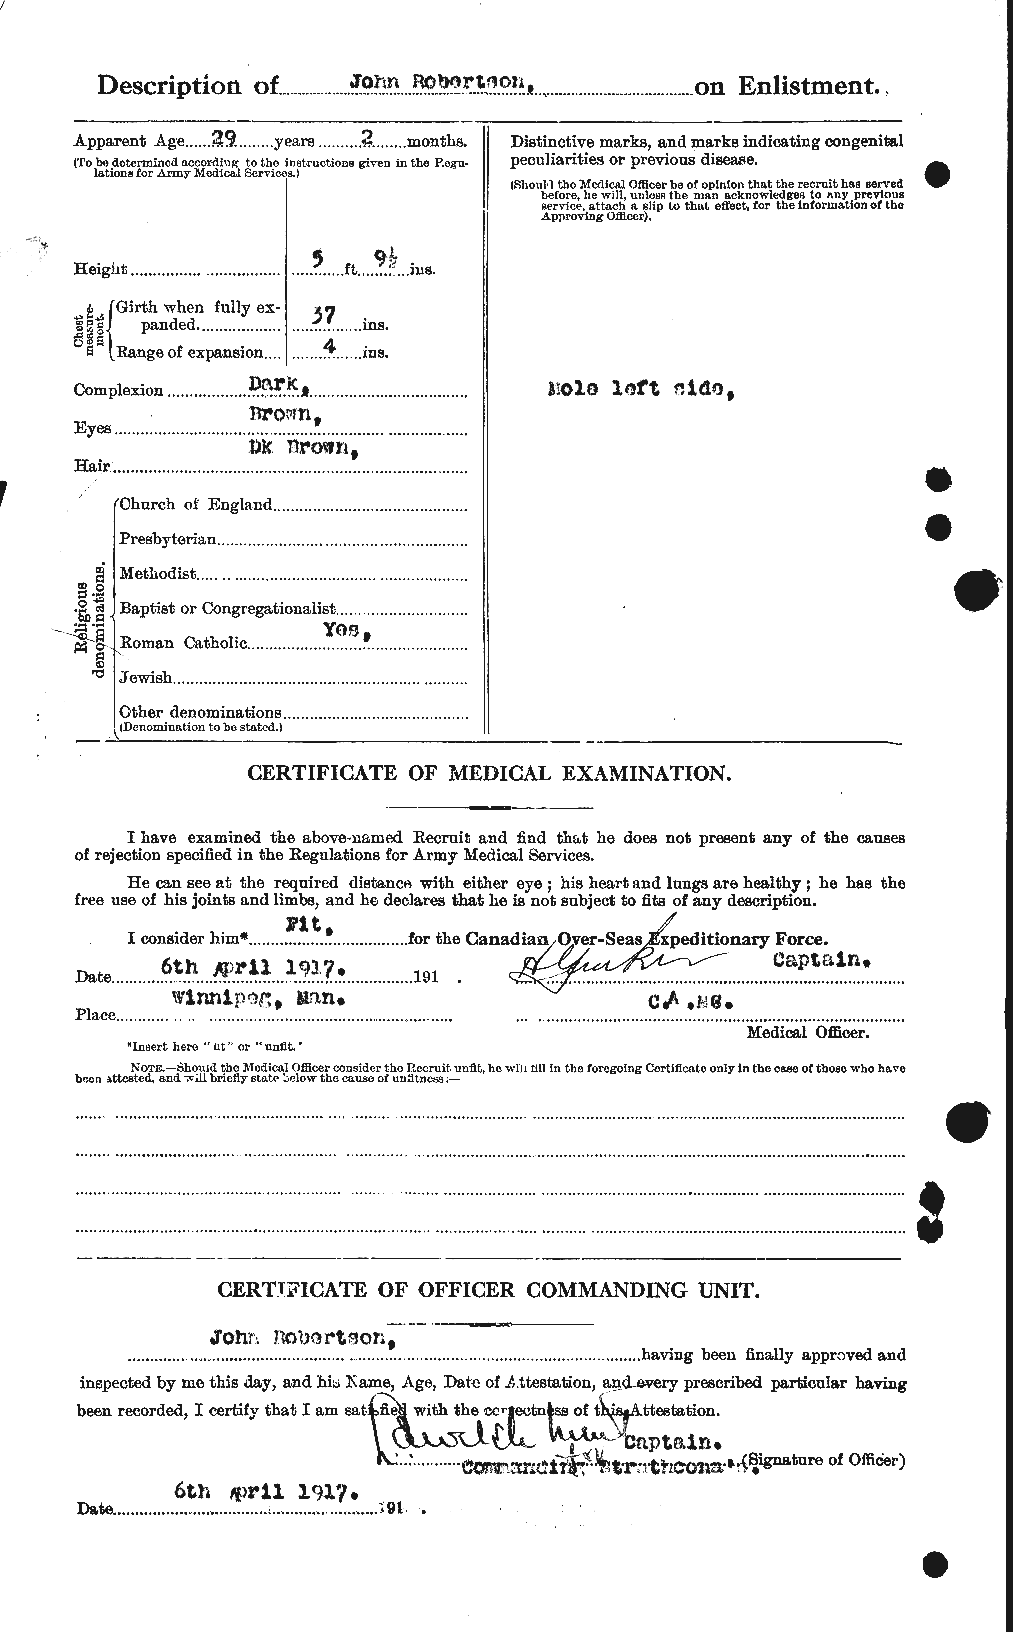 Personnel Records of the First World War - CEF 608740b